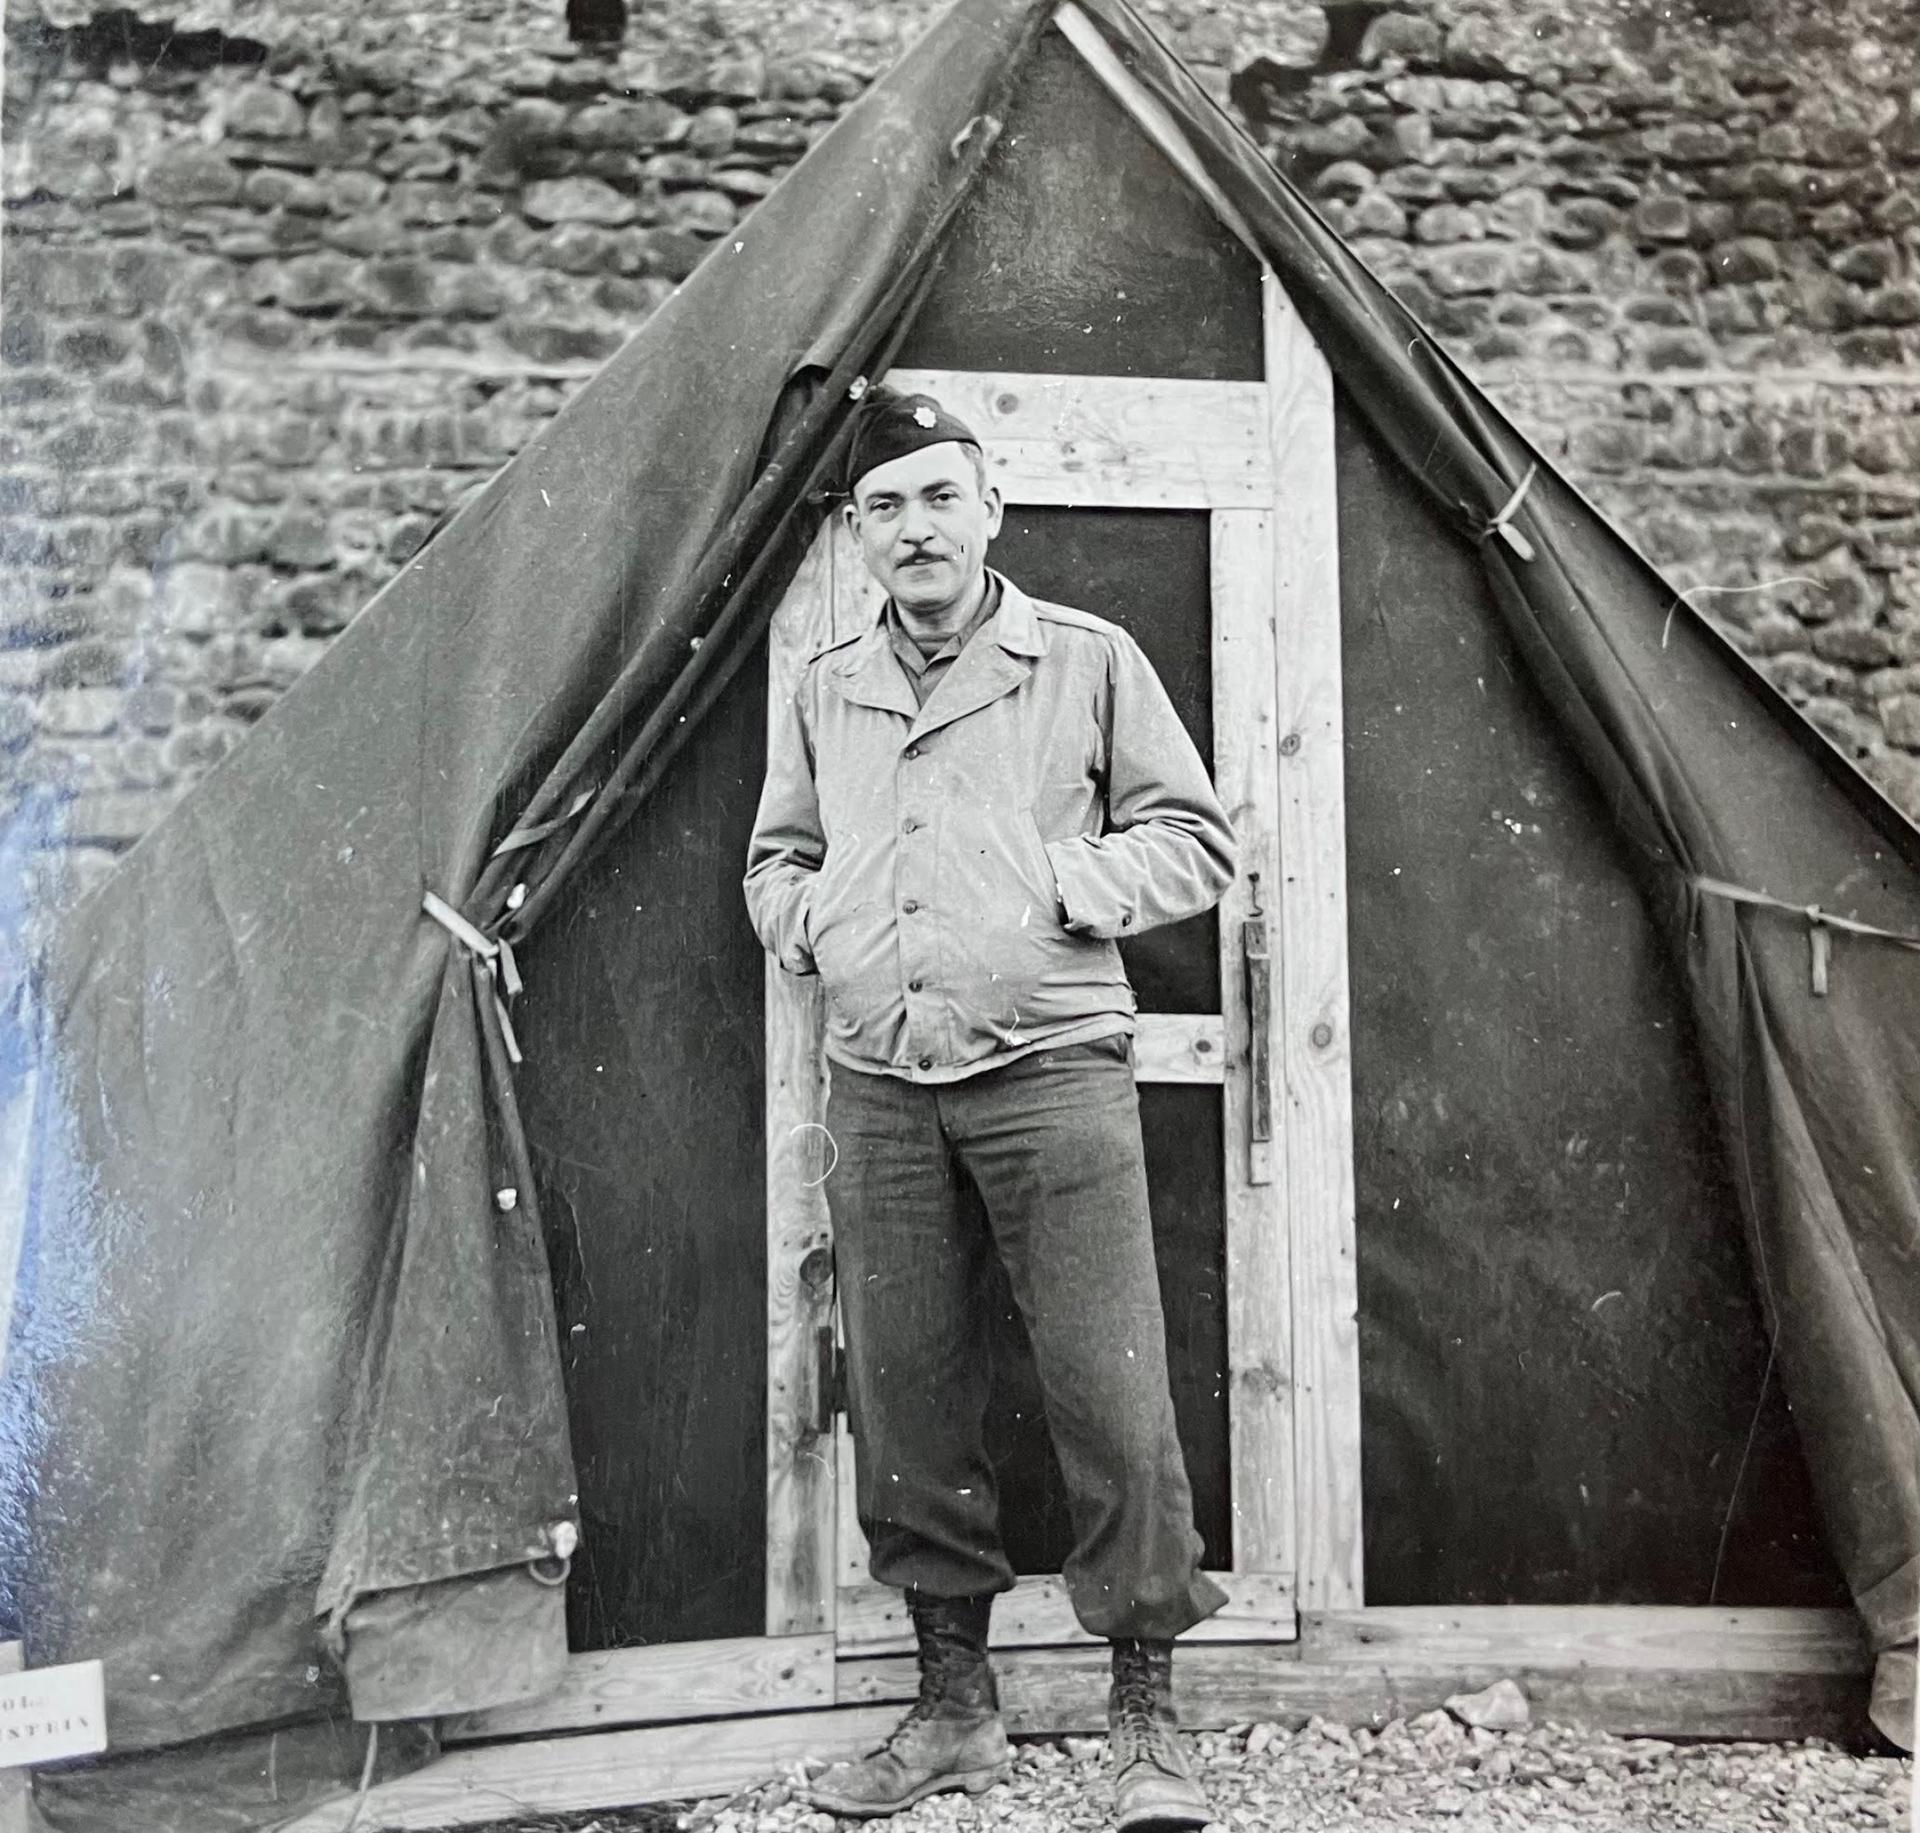 Lt. Col. Manuel E. Lichtenstein, chief surgeon with the 16th Evacuation Unit, Michael Reese Hospital, stands in front of a tent in southern Italy, 1944.